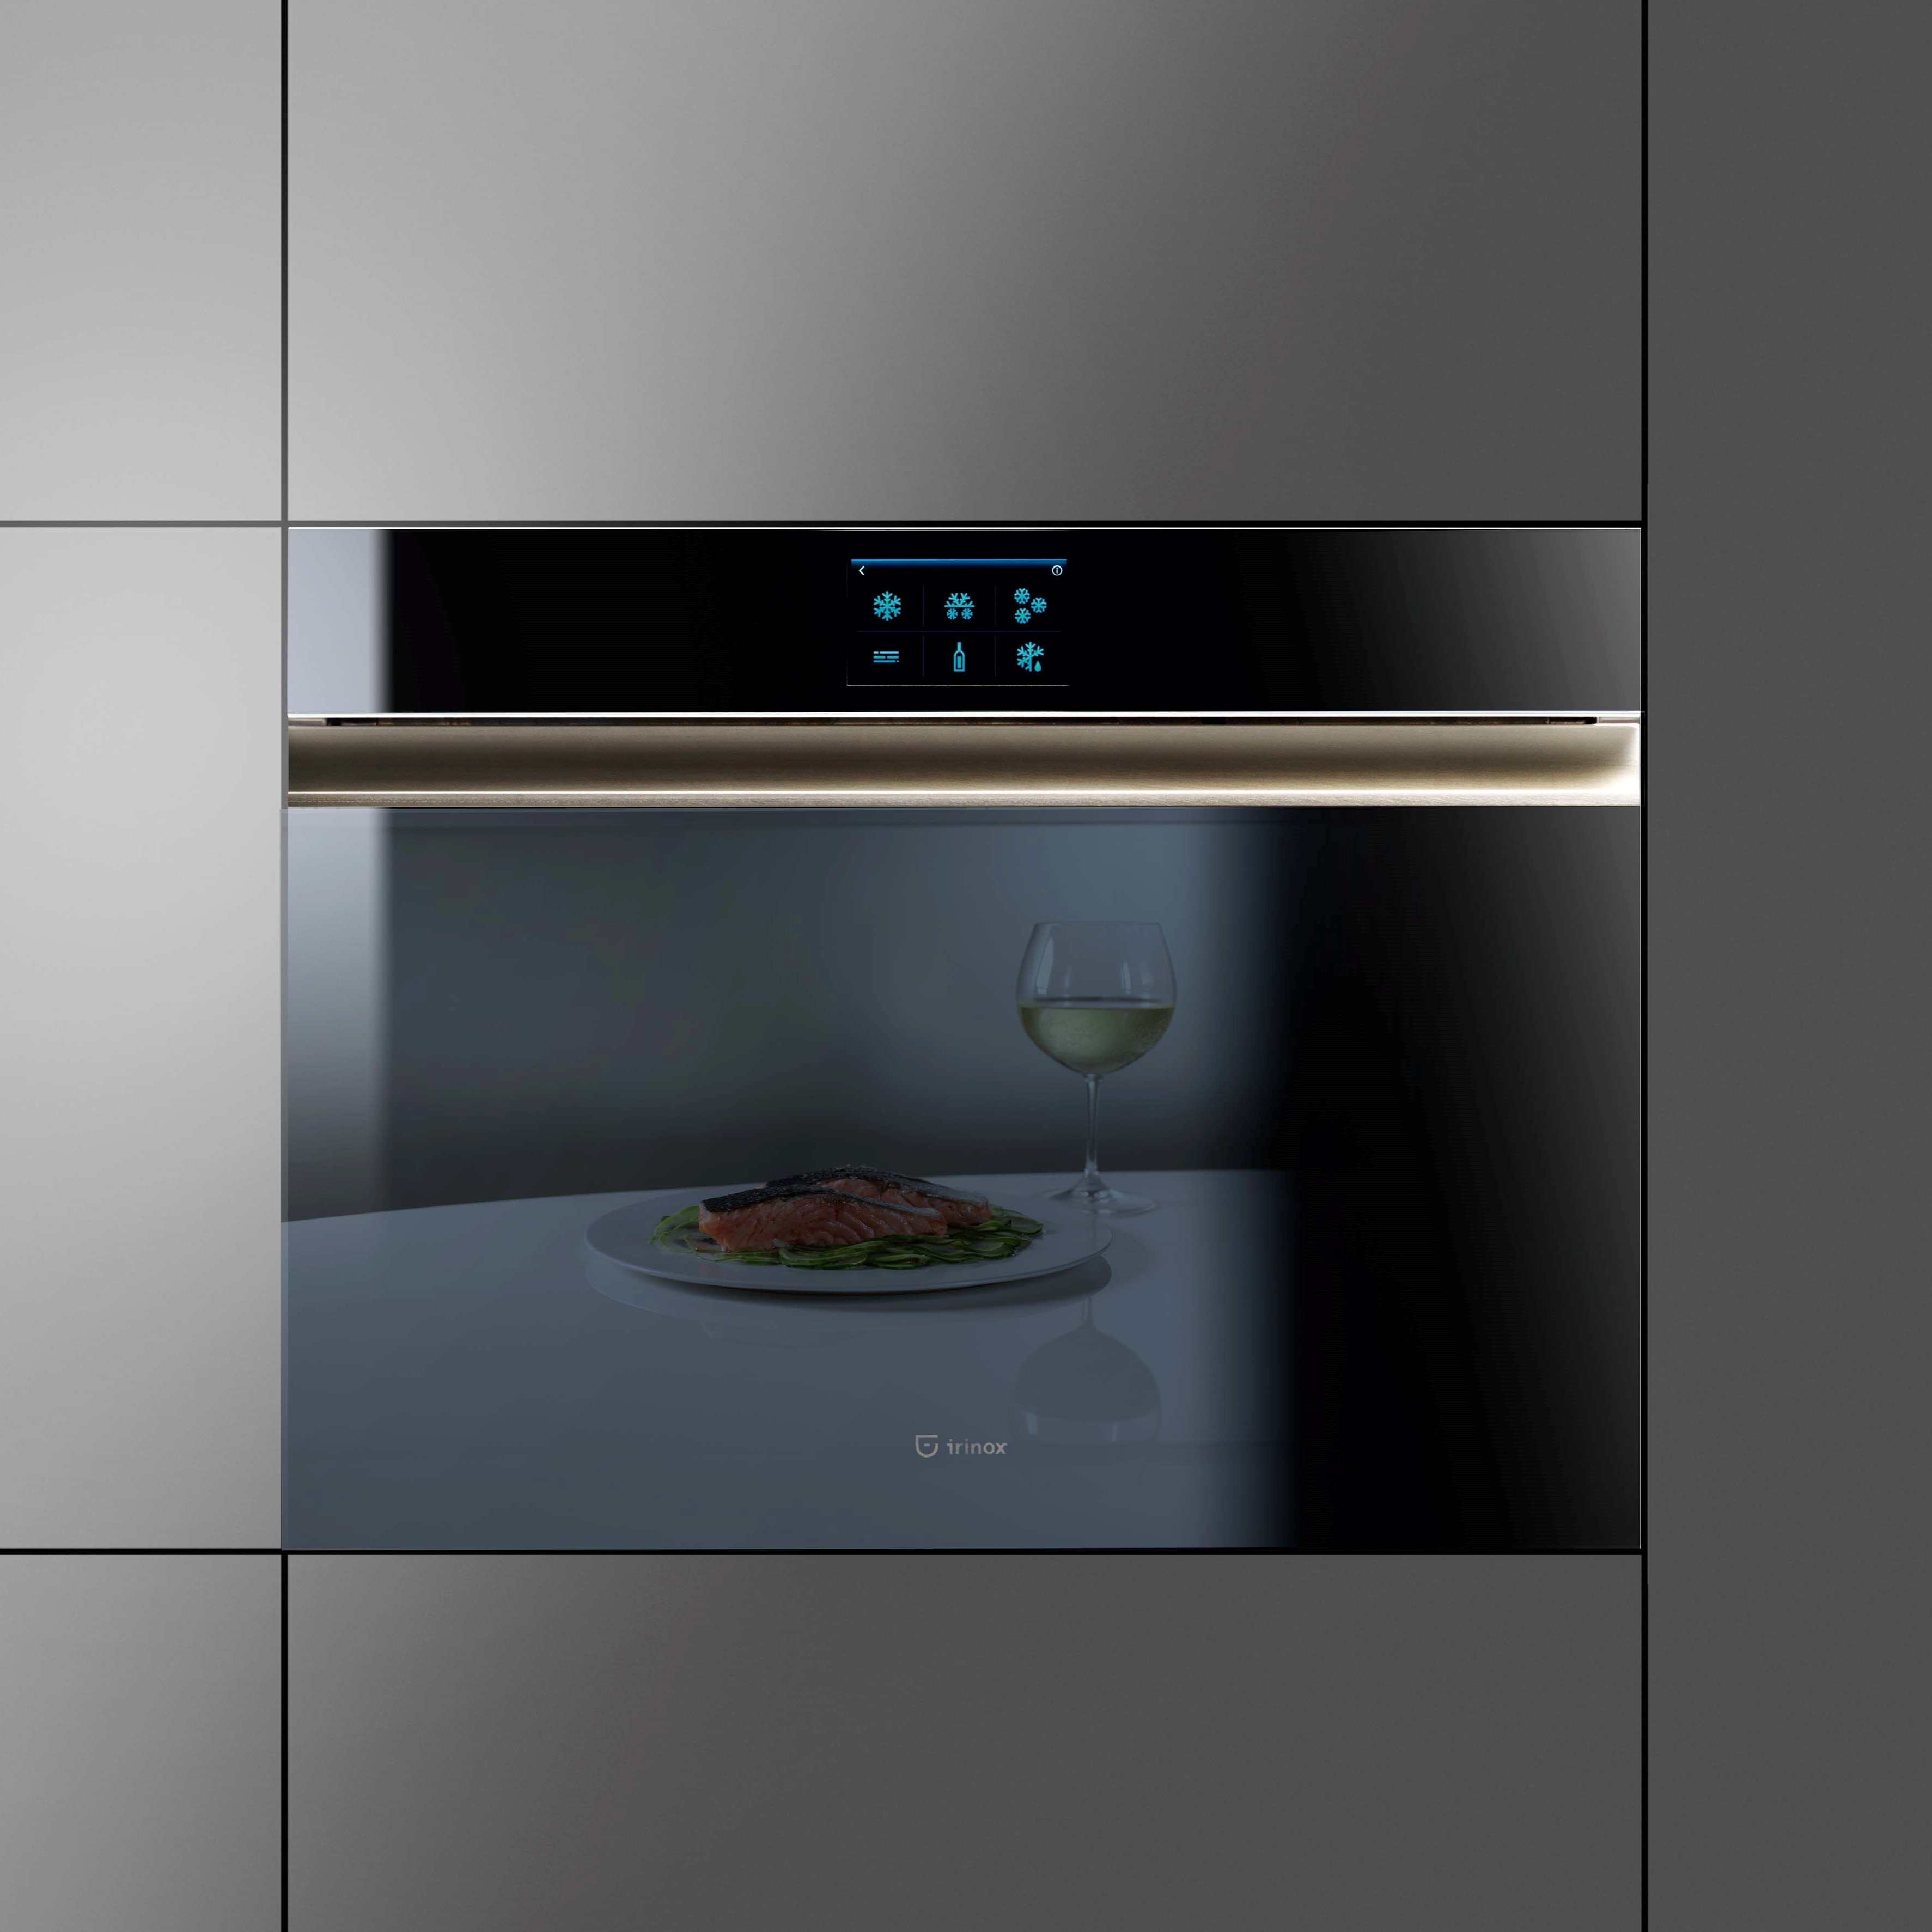 A multifunctional household appliance, that brings the future to the kitchen.